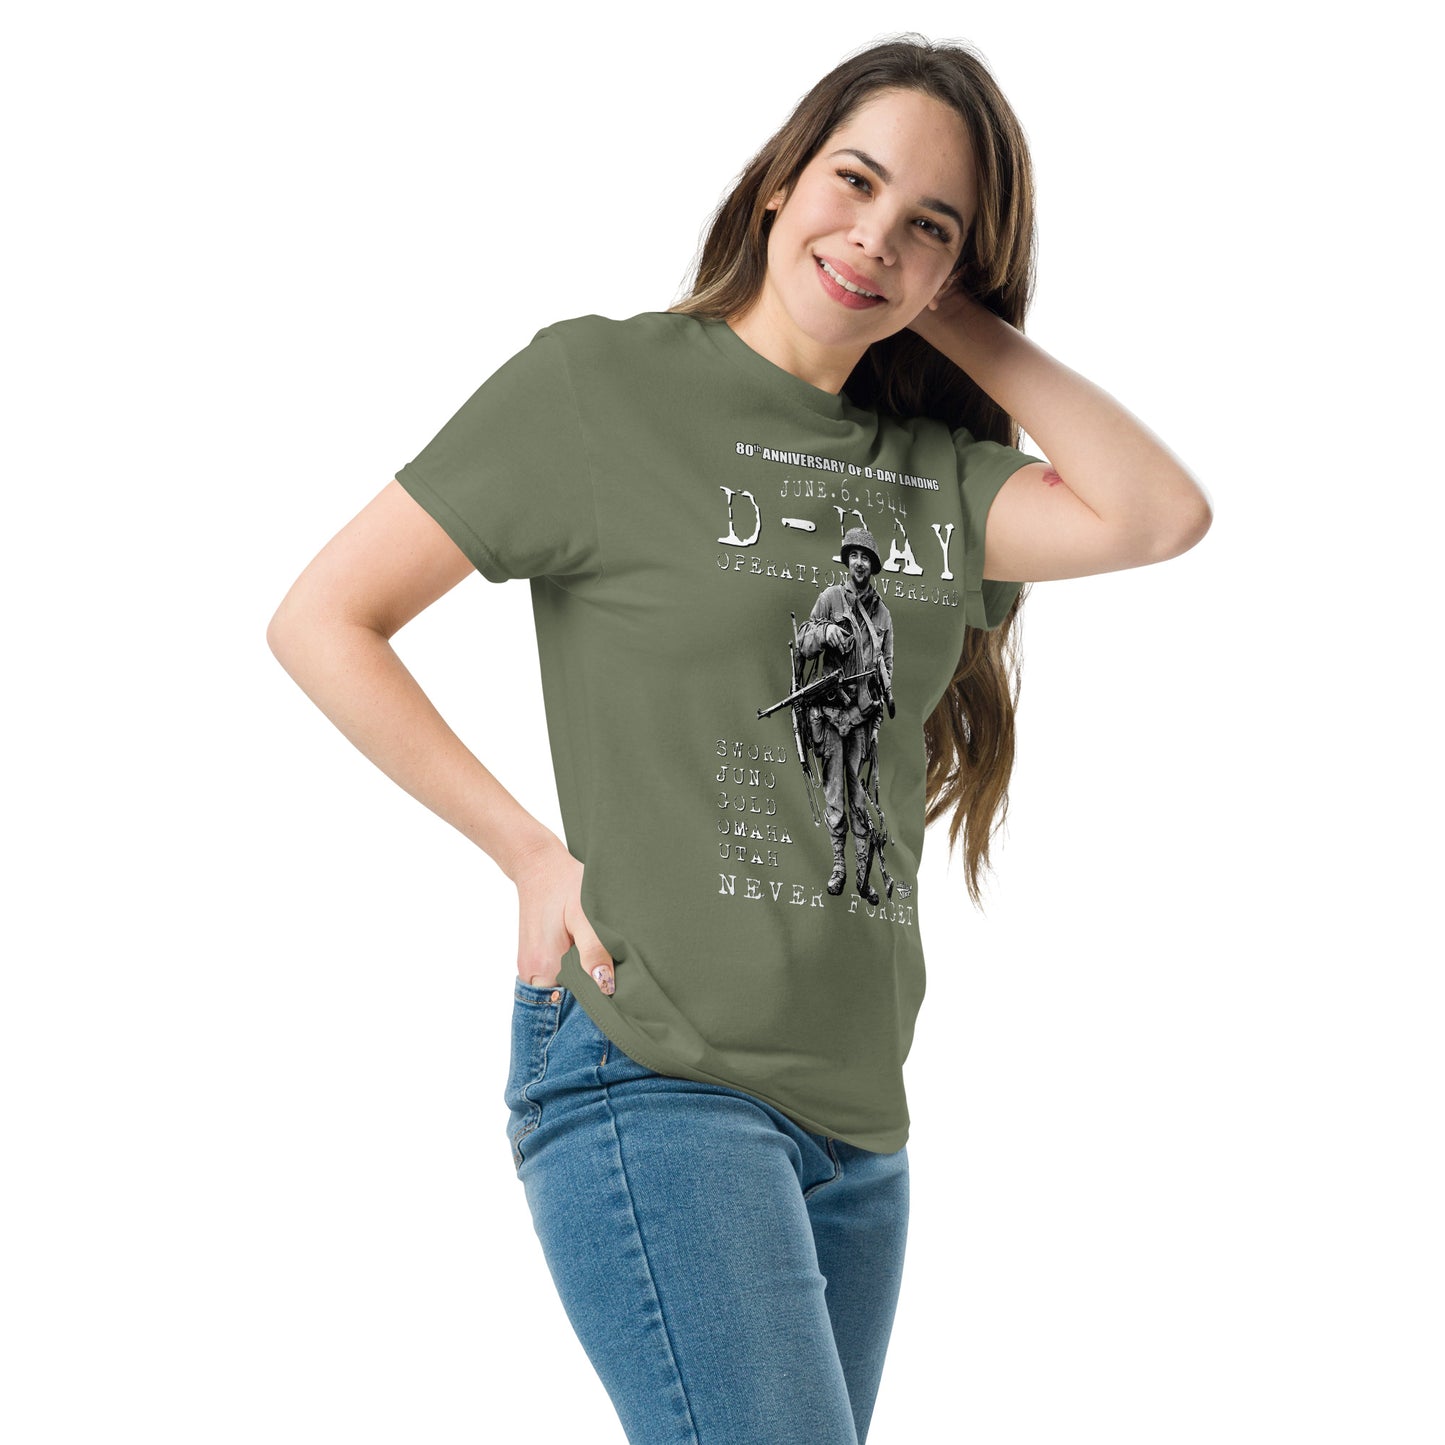 D-Day - Operation Overlord 1944 T-shirt